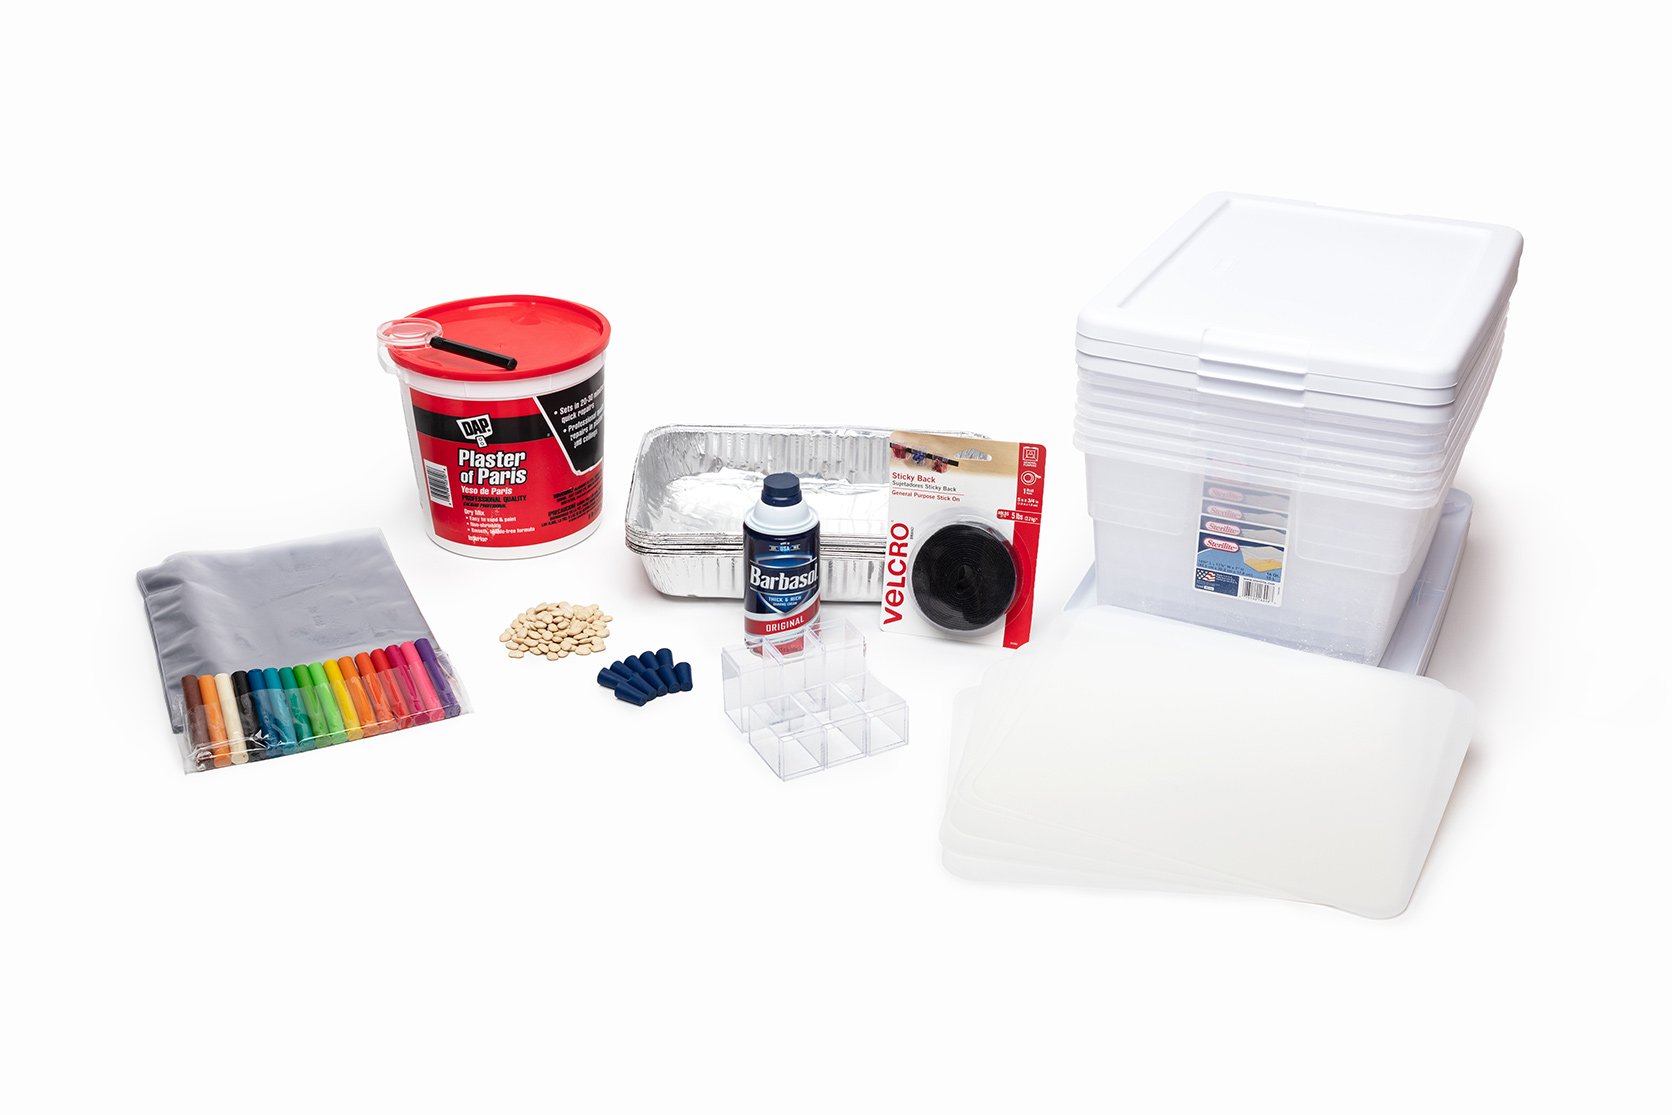 PhD Science hands-on materials kit from Level 4 Module 1 that includes plastic bins, modeling clay, cutting boards, and plaster of Paris